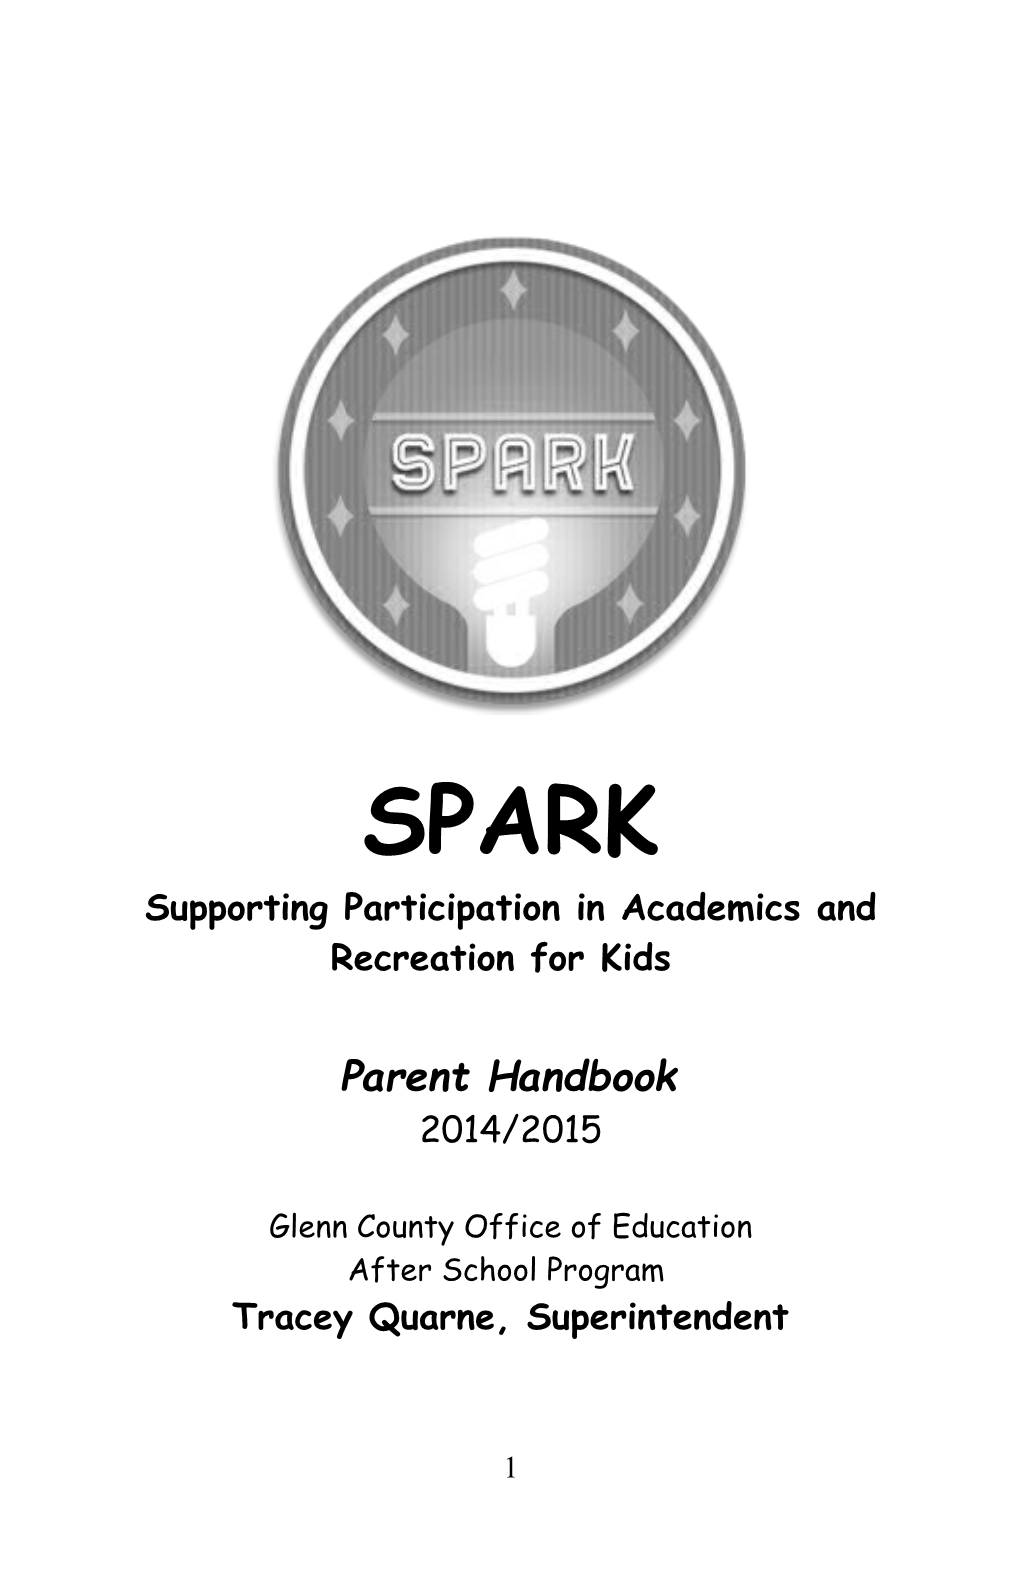 Supporting Participation in Academics and Recreation for Kids